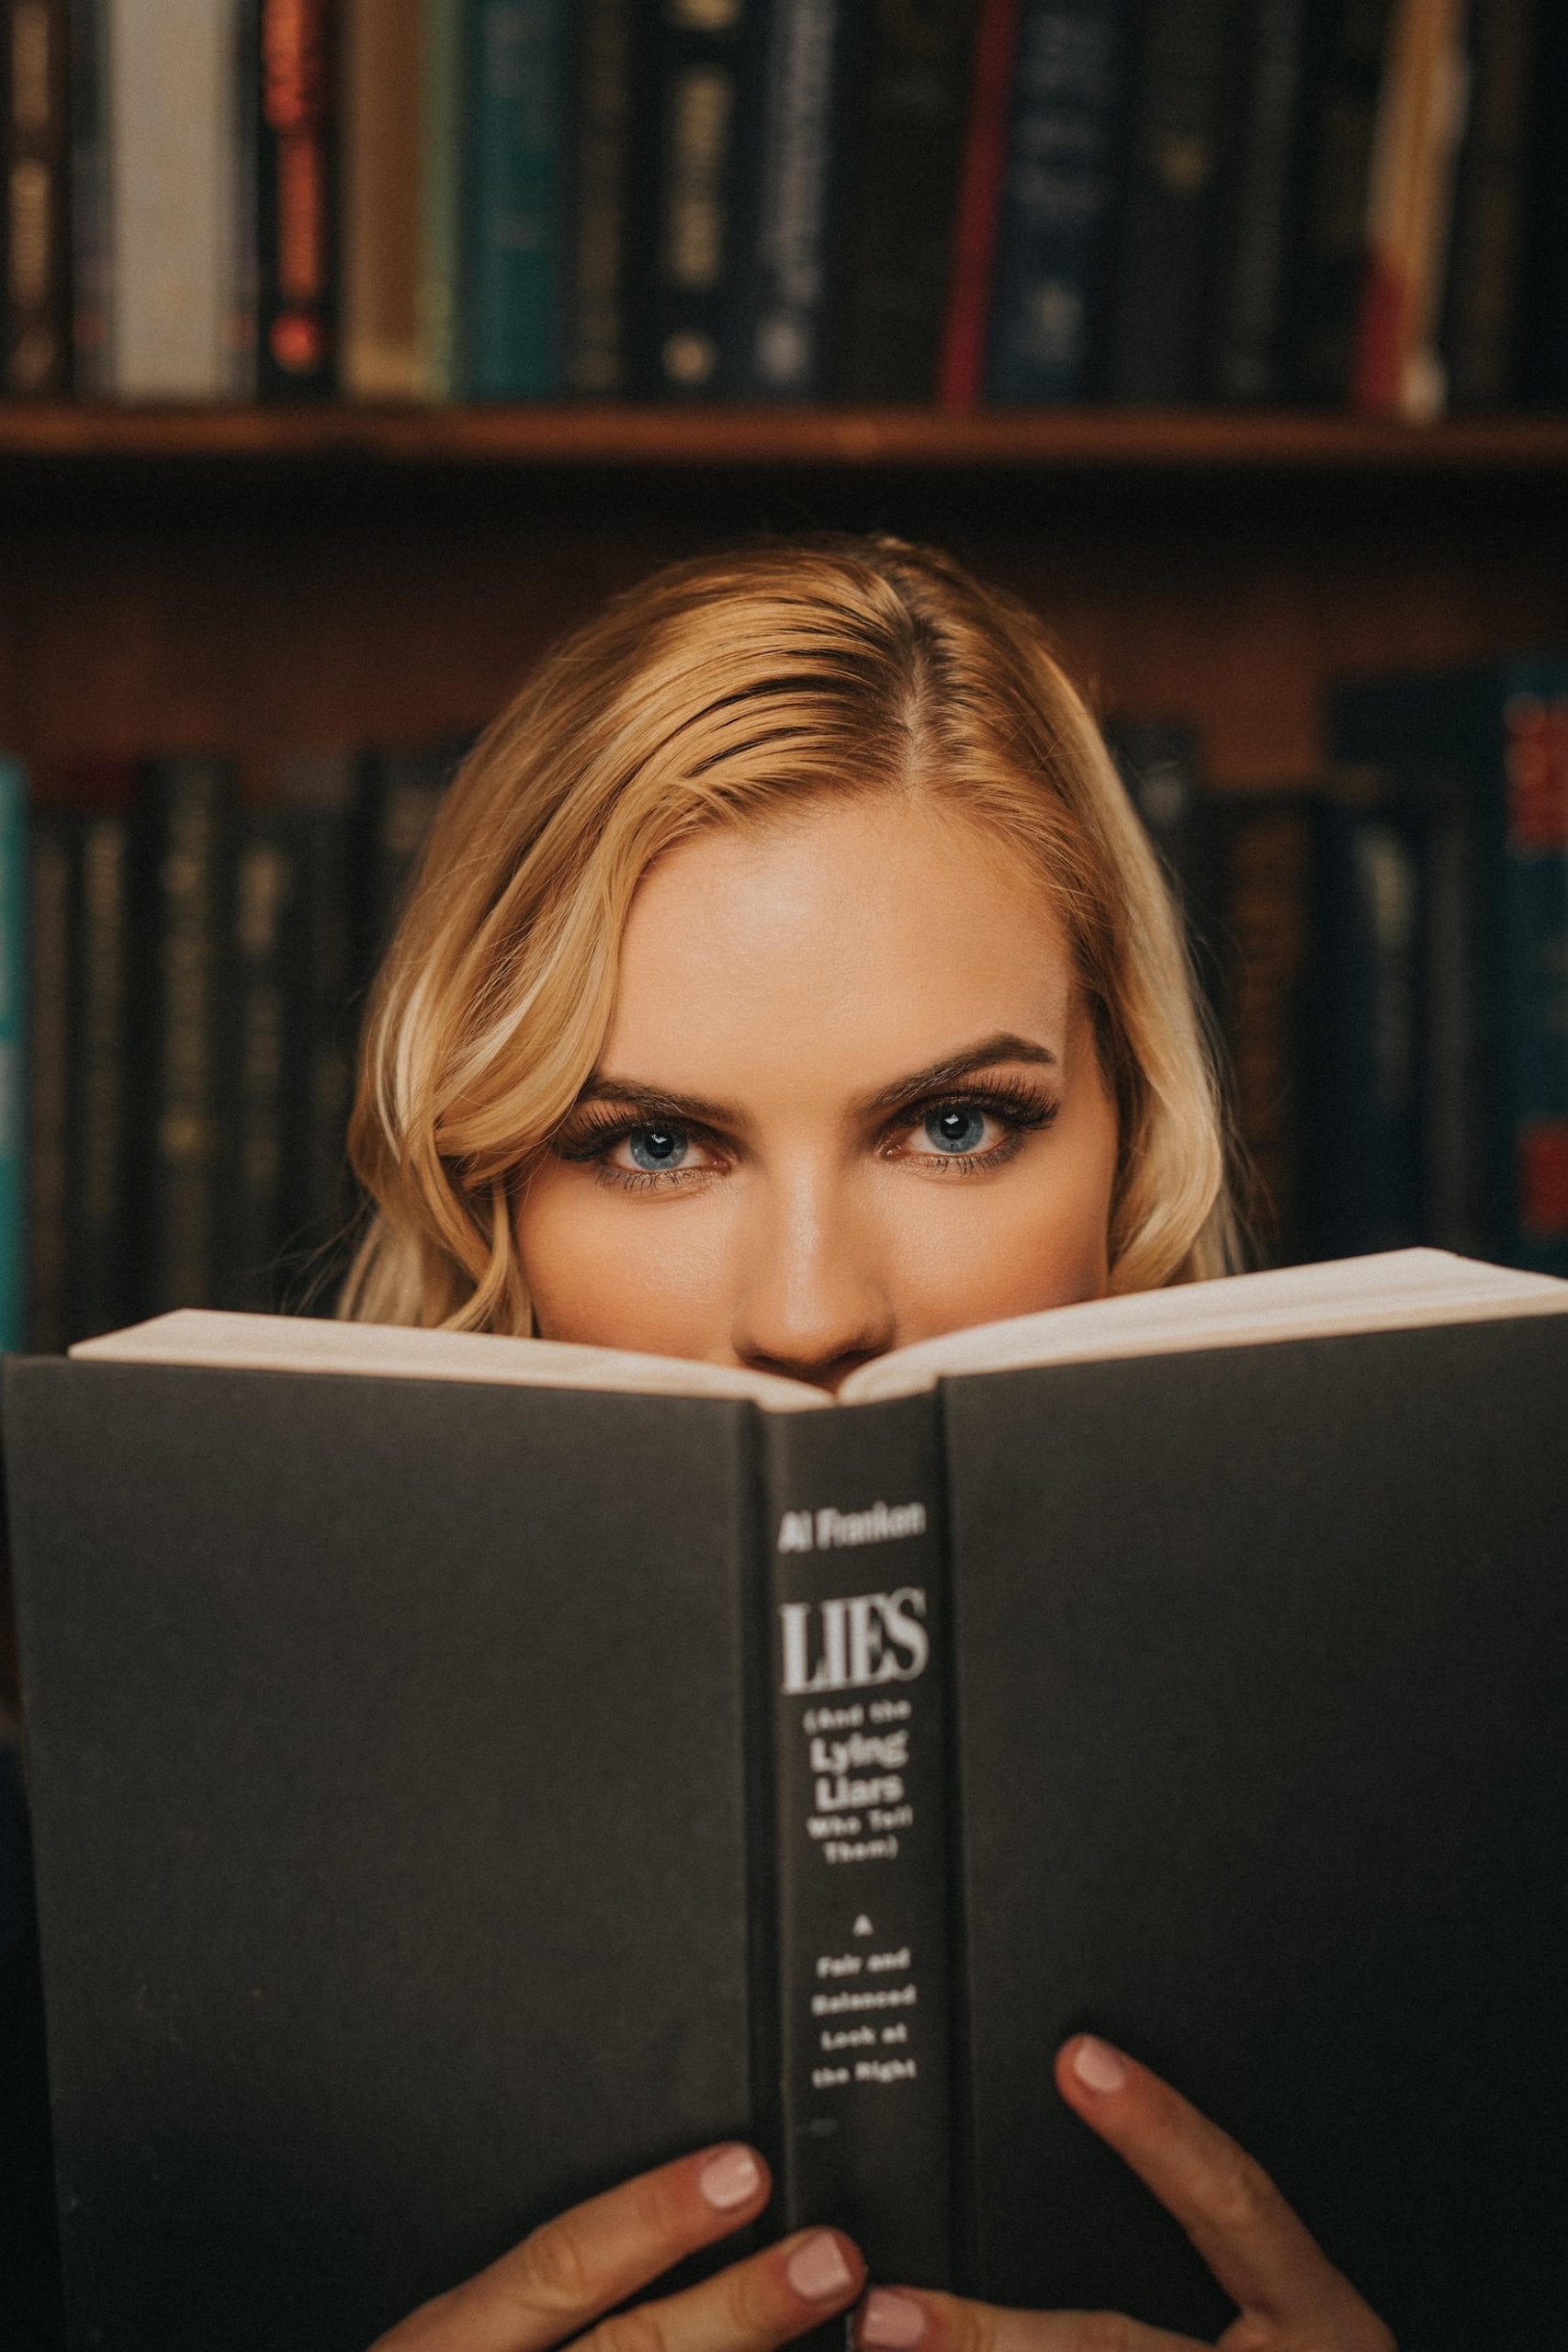 Professional Photography Services by C&I Studios Woman with blond hair posing for camera from behind a book